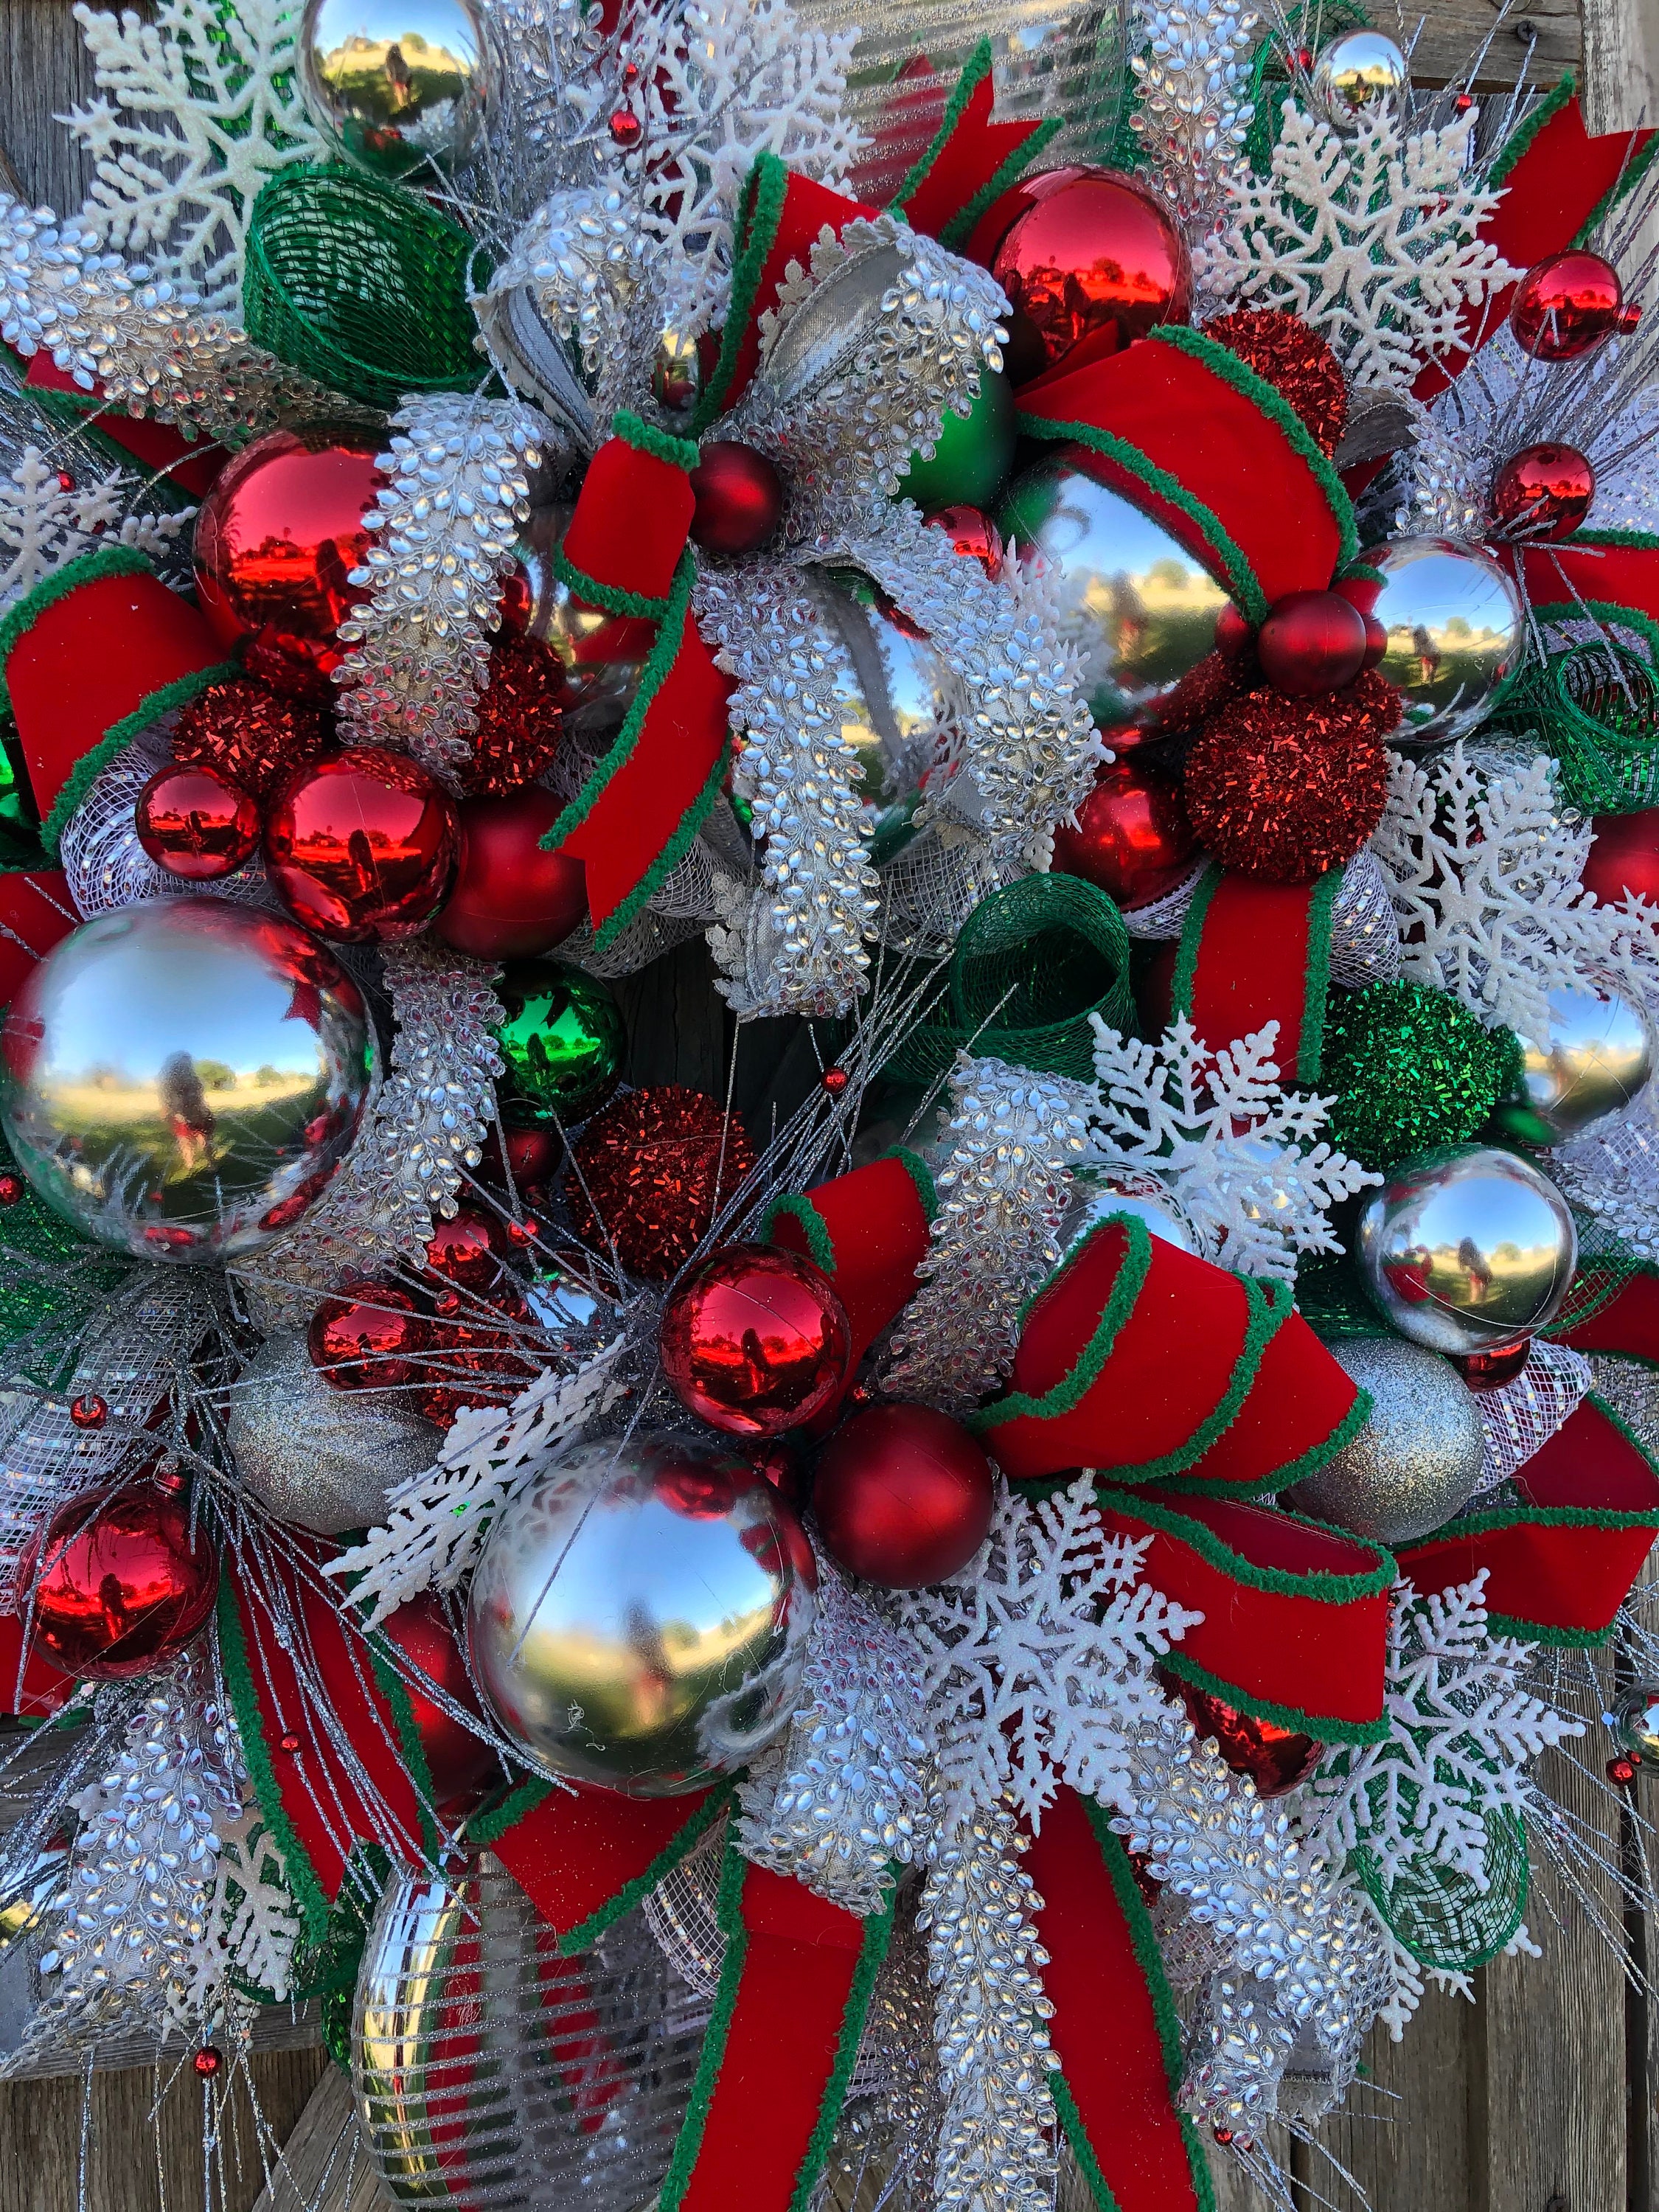  Christmas Wreath Decorating Ideas for Large Space